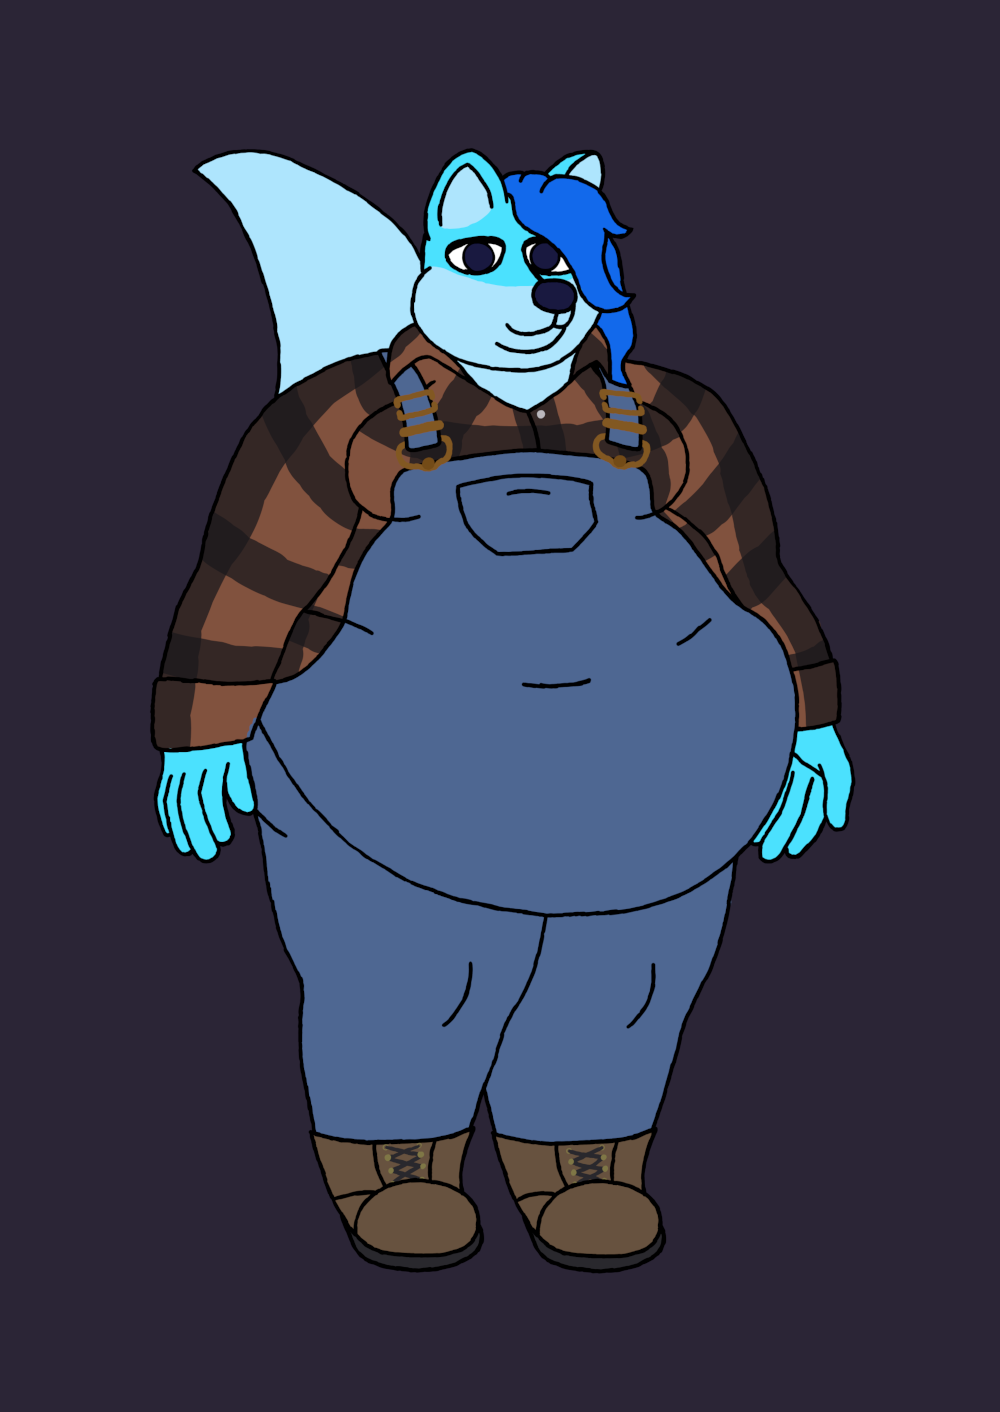 A very fat, blue slime fox. They're wearing a brown flannel under blue overalls and brown boots. They have moobs, not boobs, which have never been estrogenated..